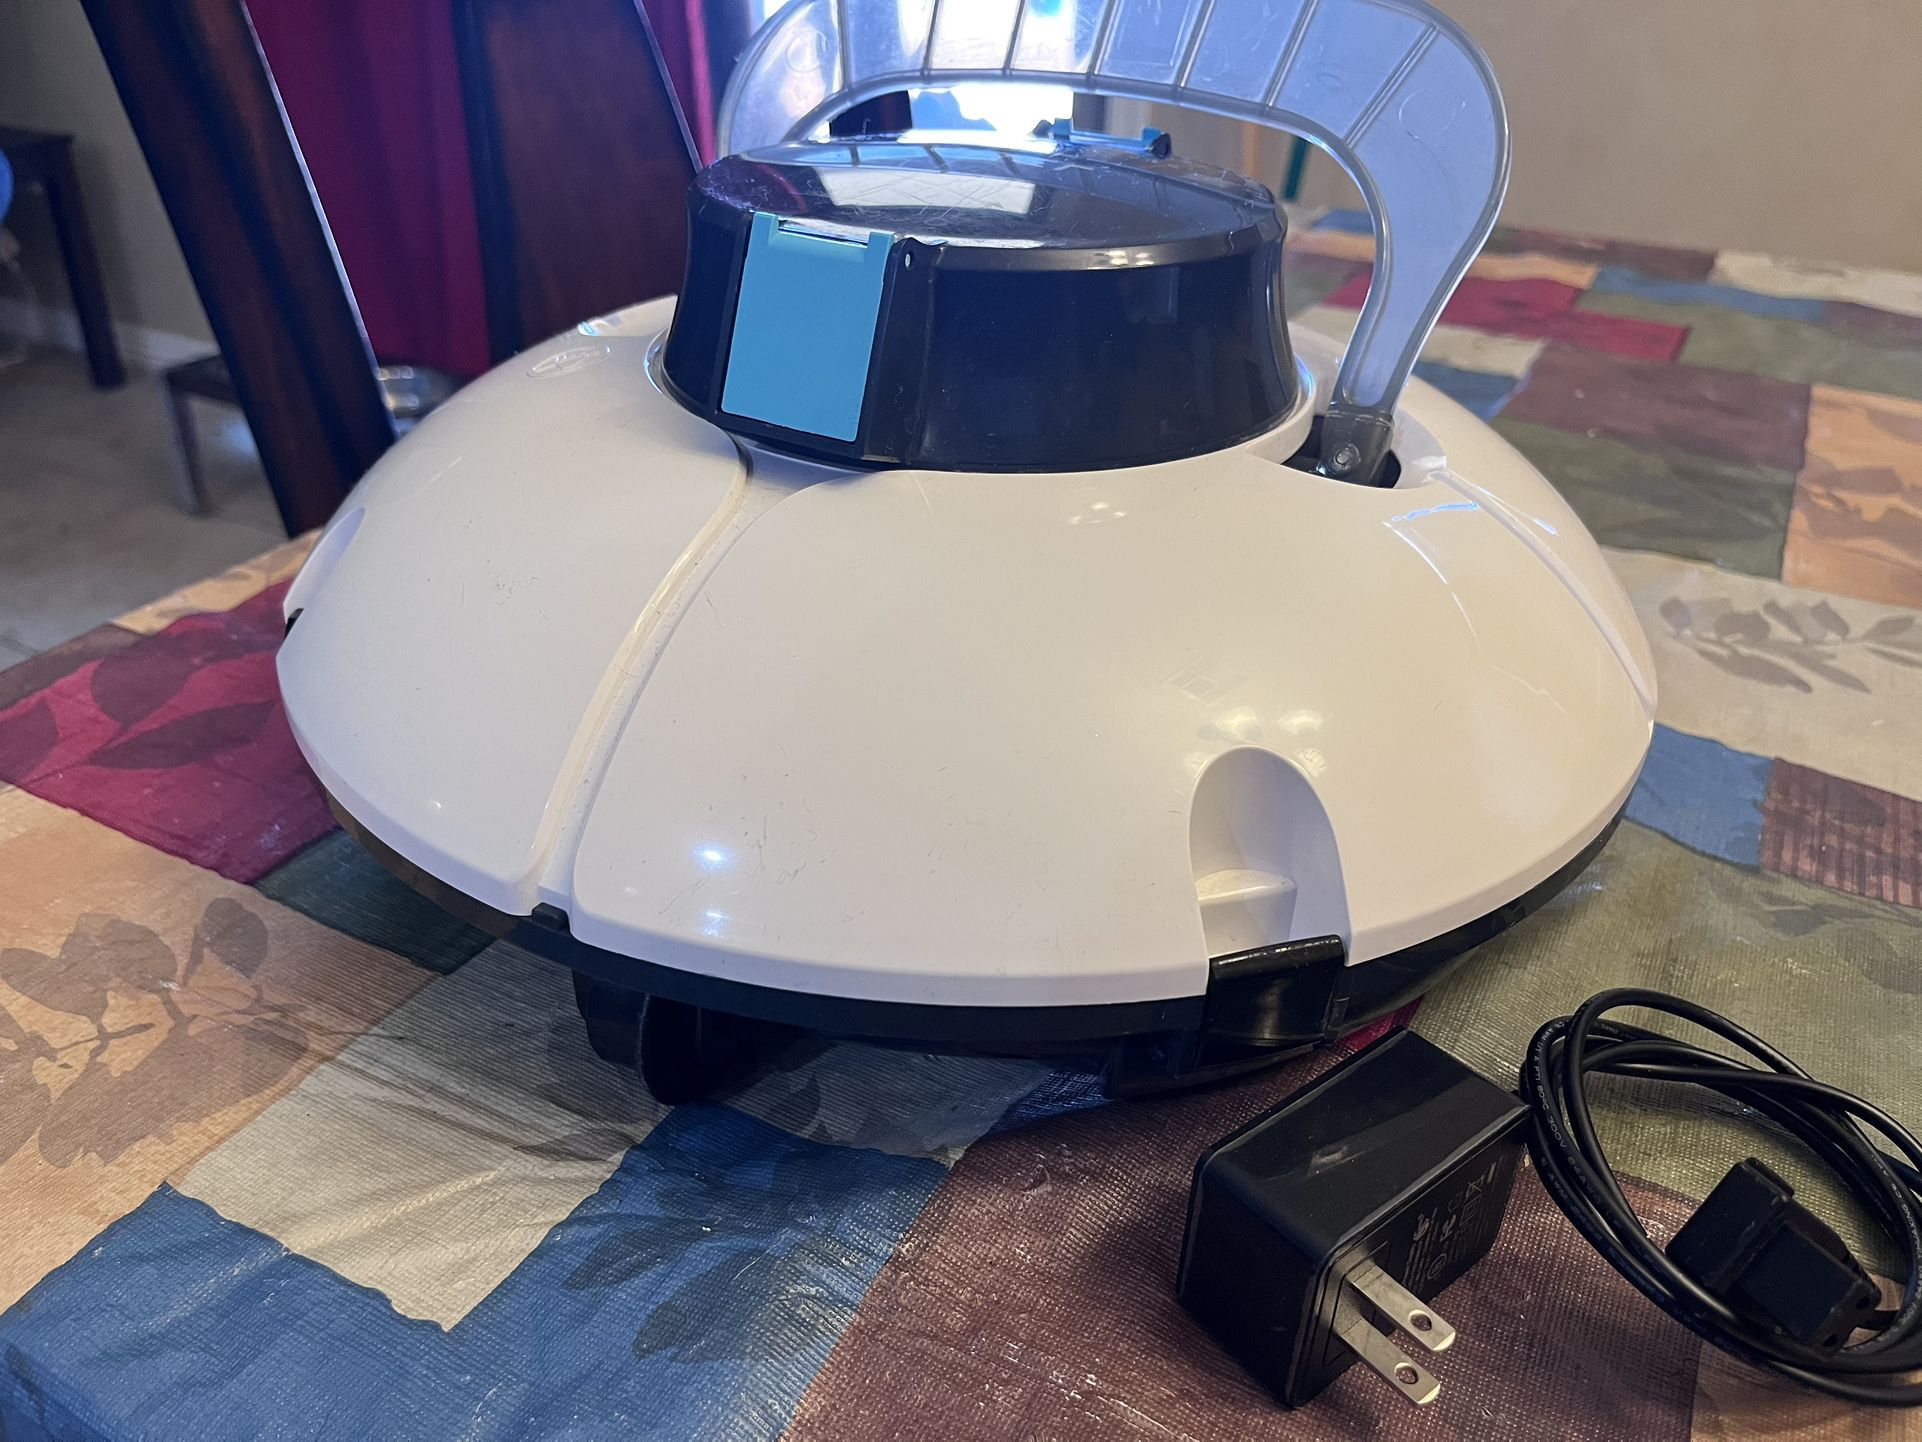 Automatic Grill Cleaning Robot for Sale in North Babylon, NY - OfferUp